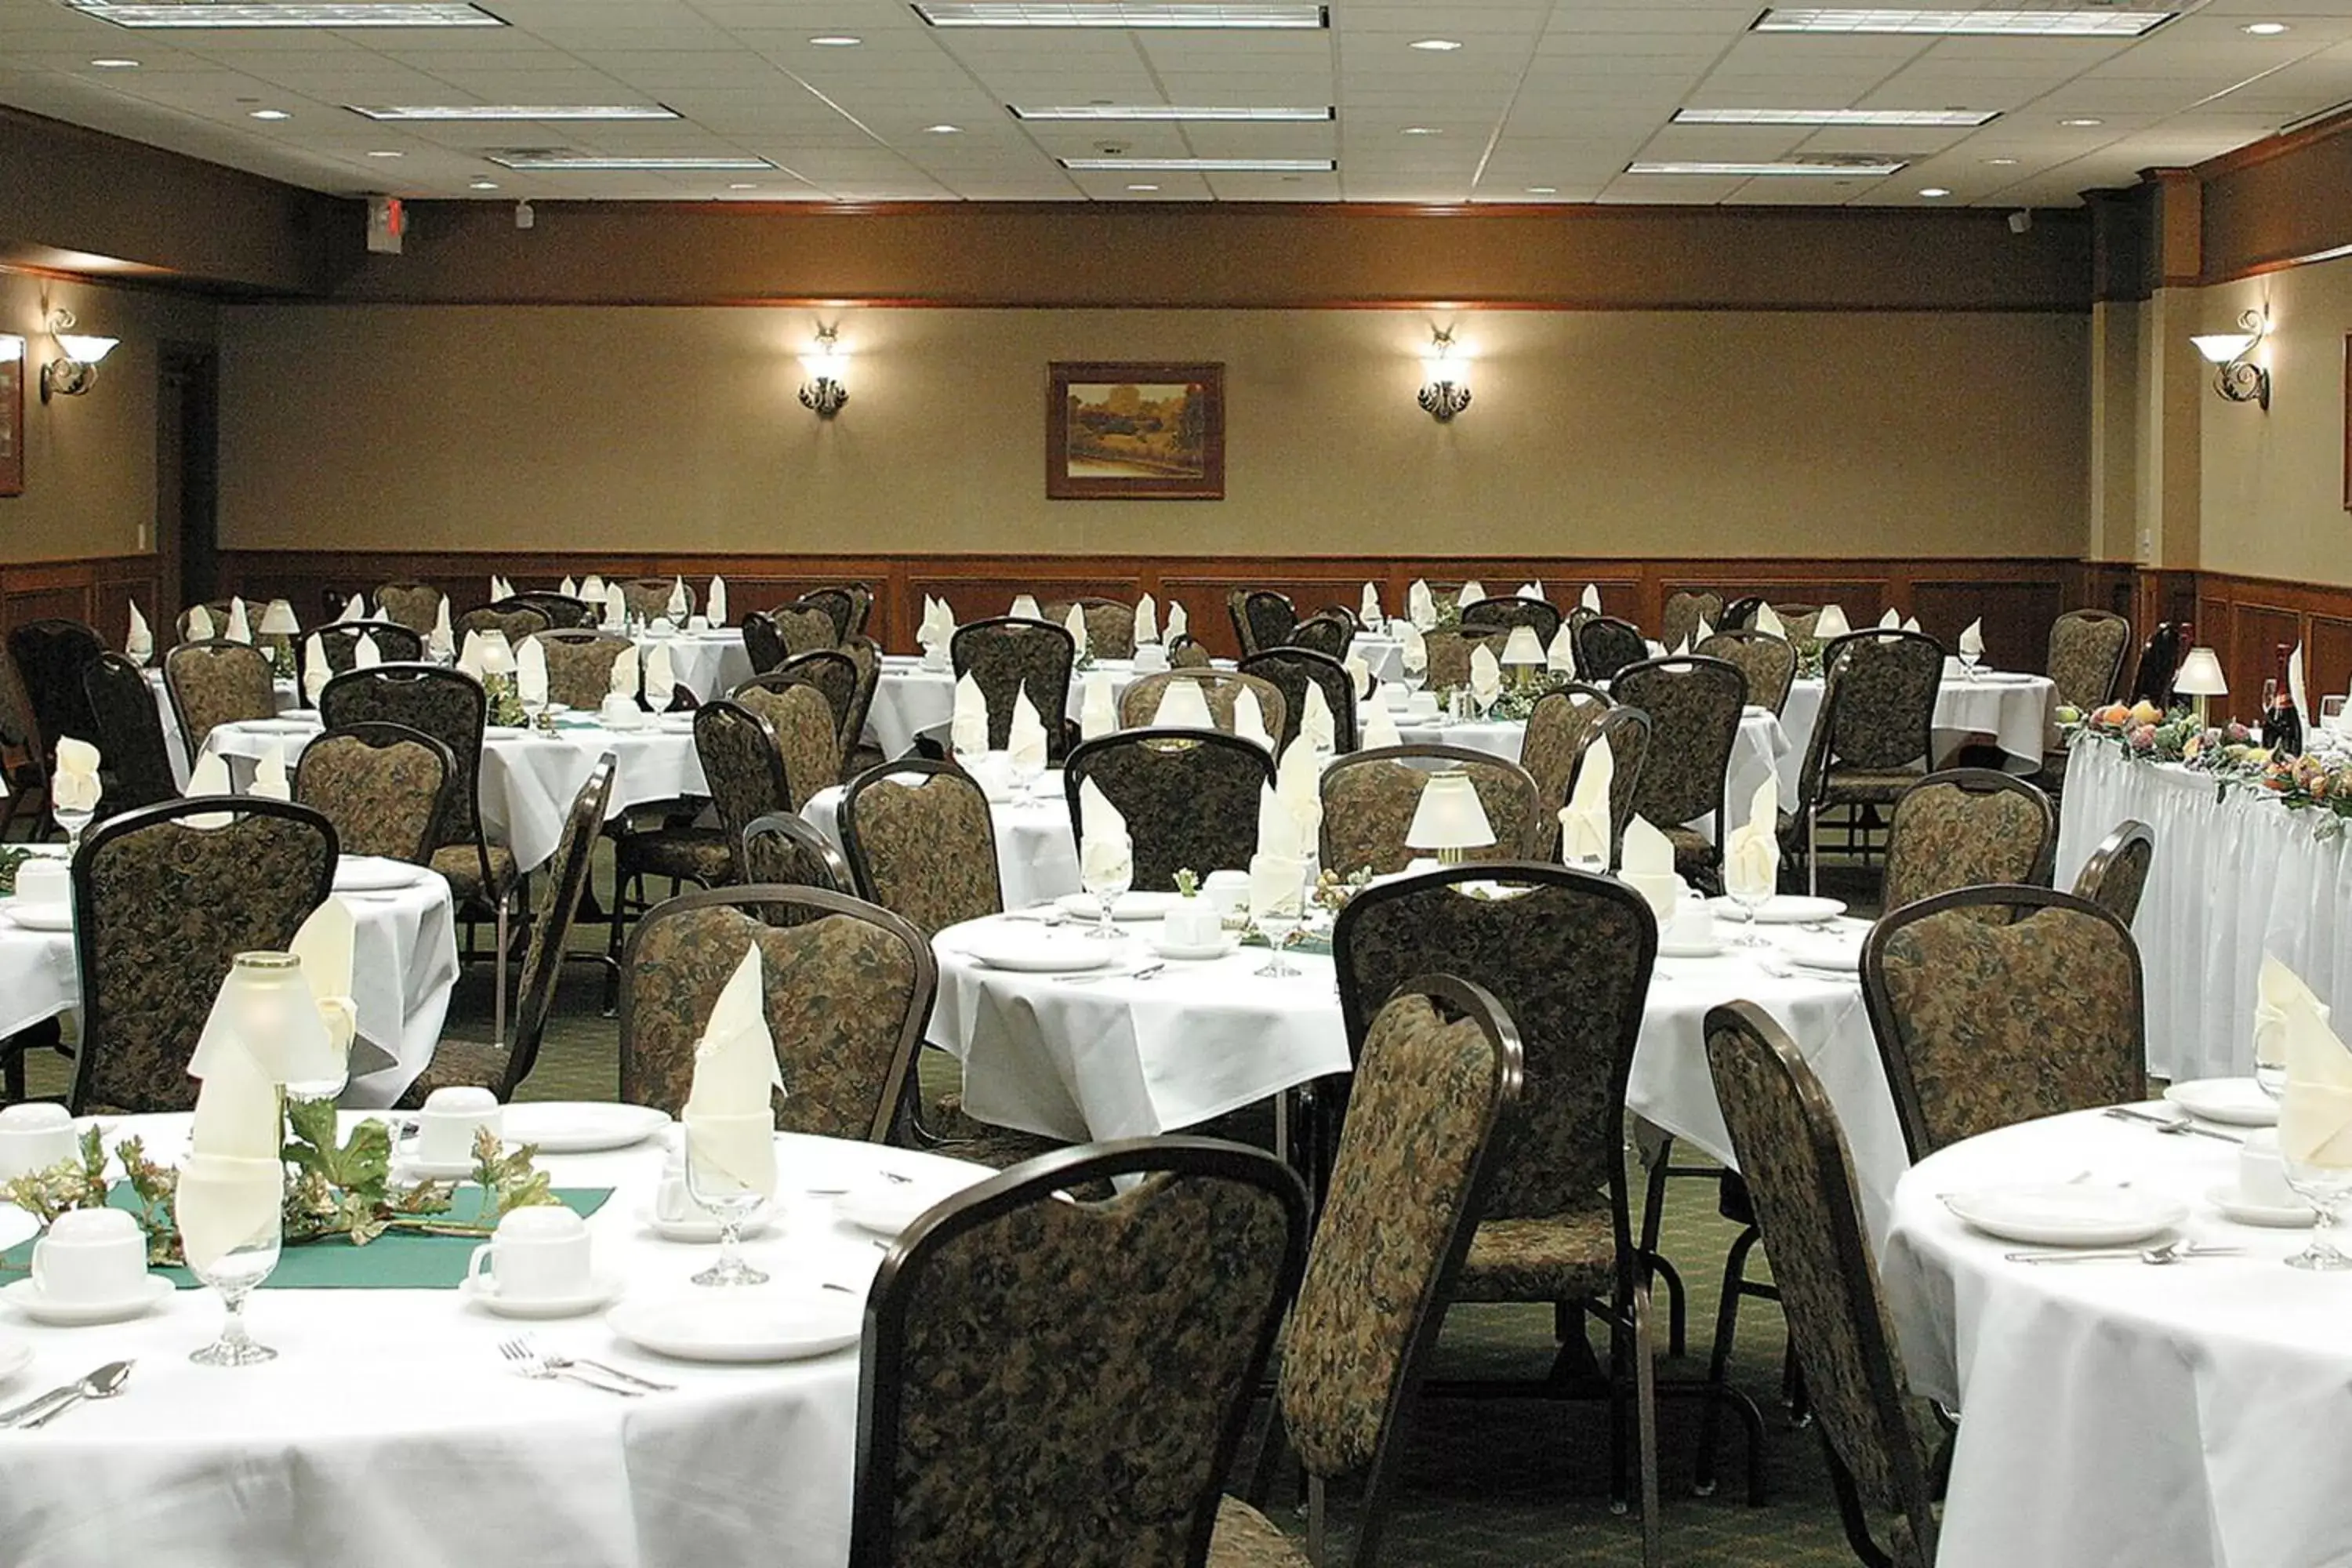 Banquet/Function facilities in Comfort Inn & Suites Rapid City near Mt Rushmore